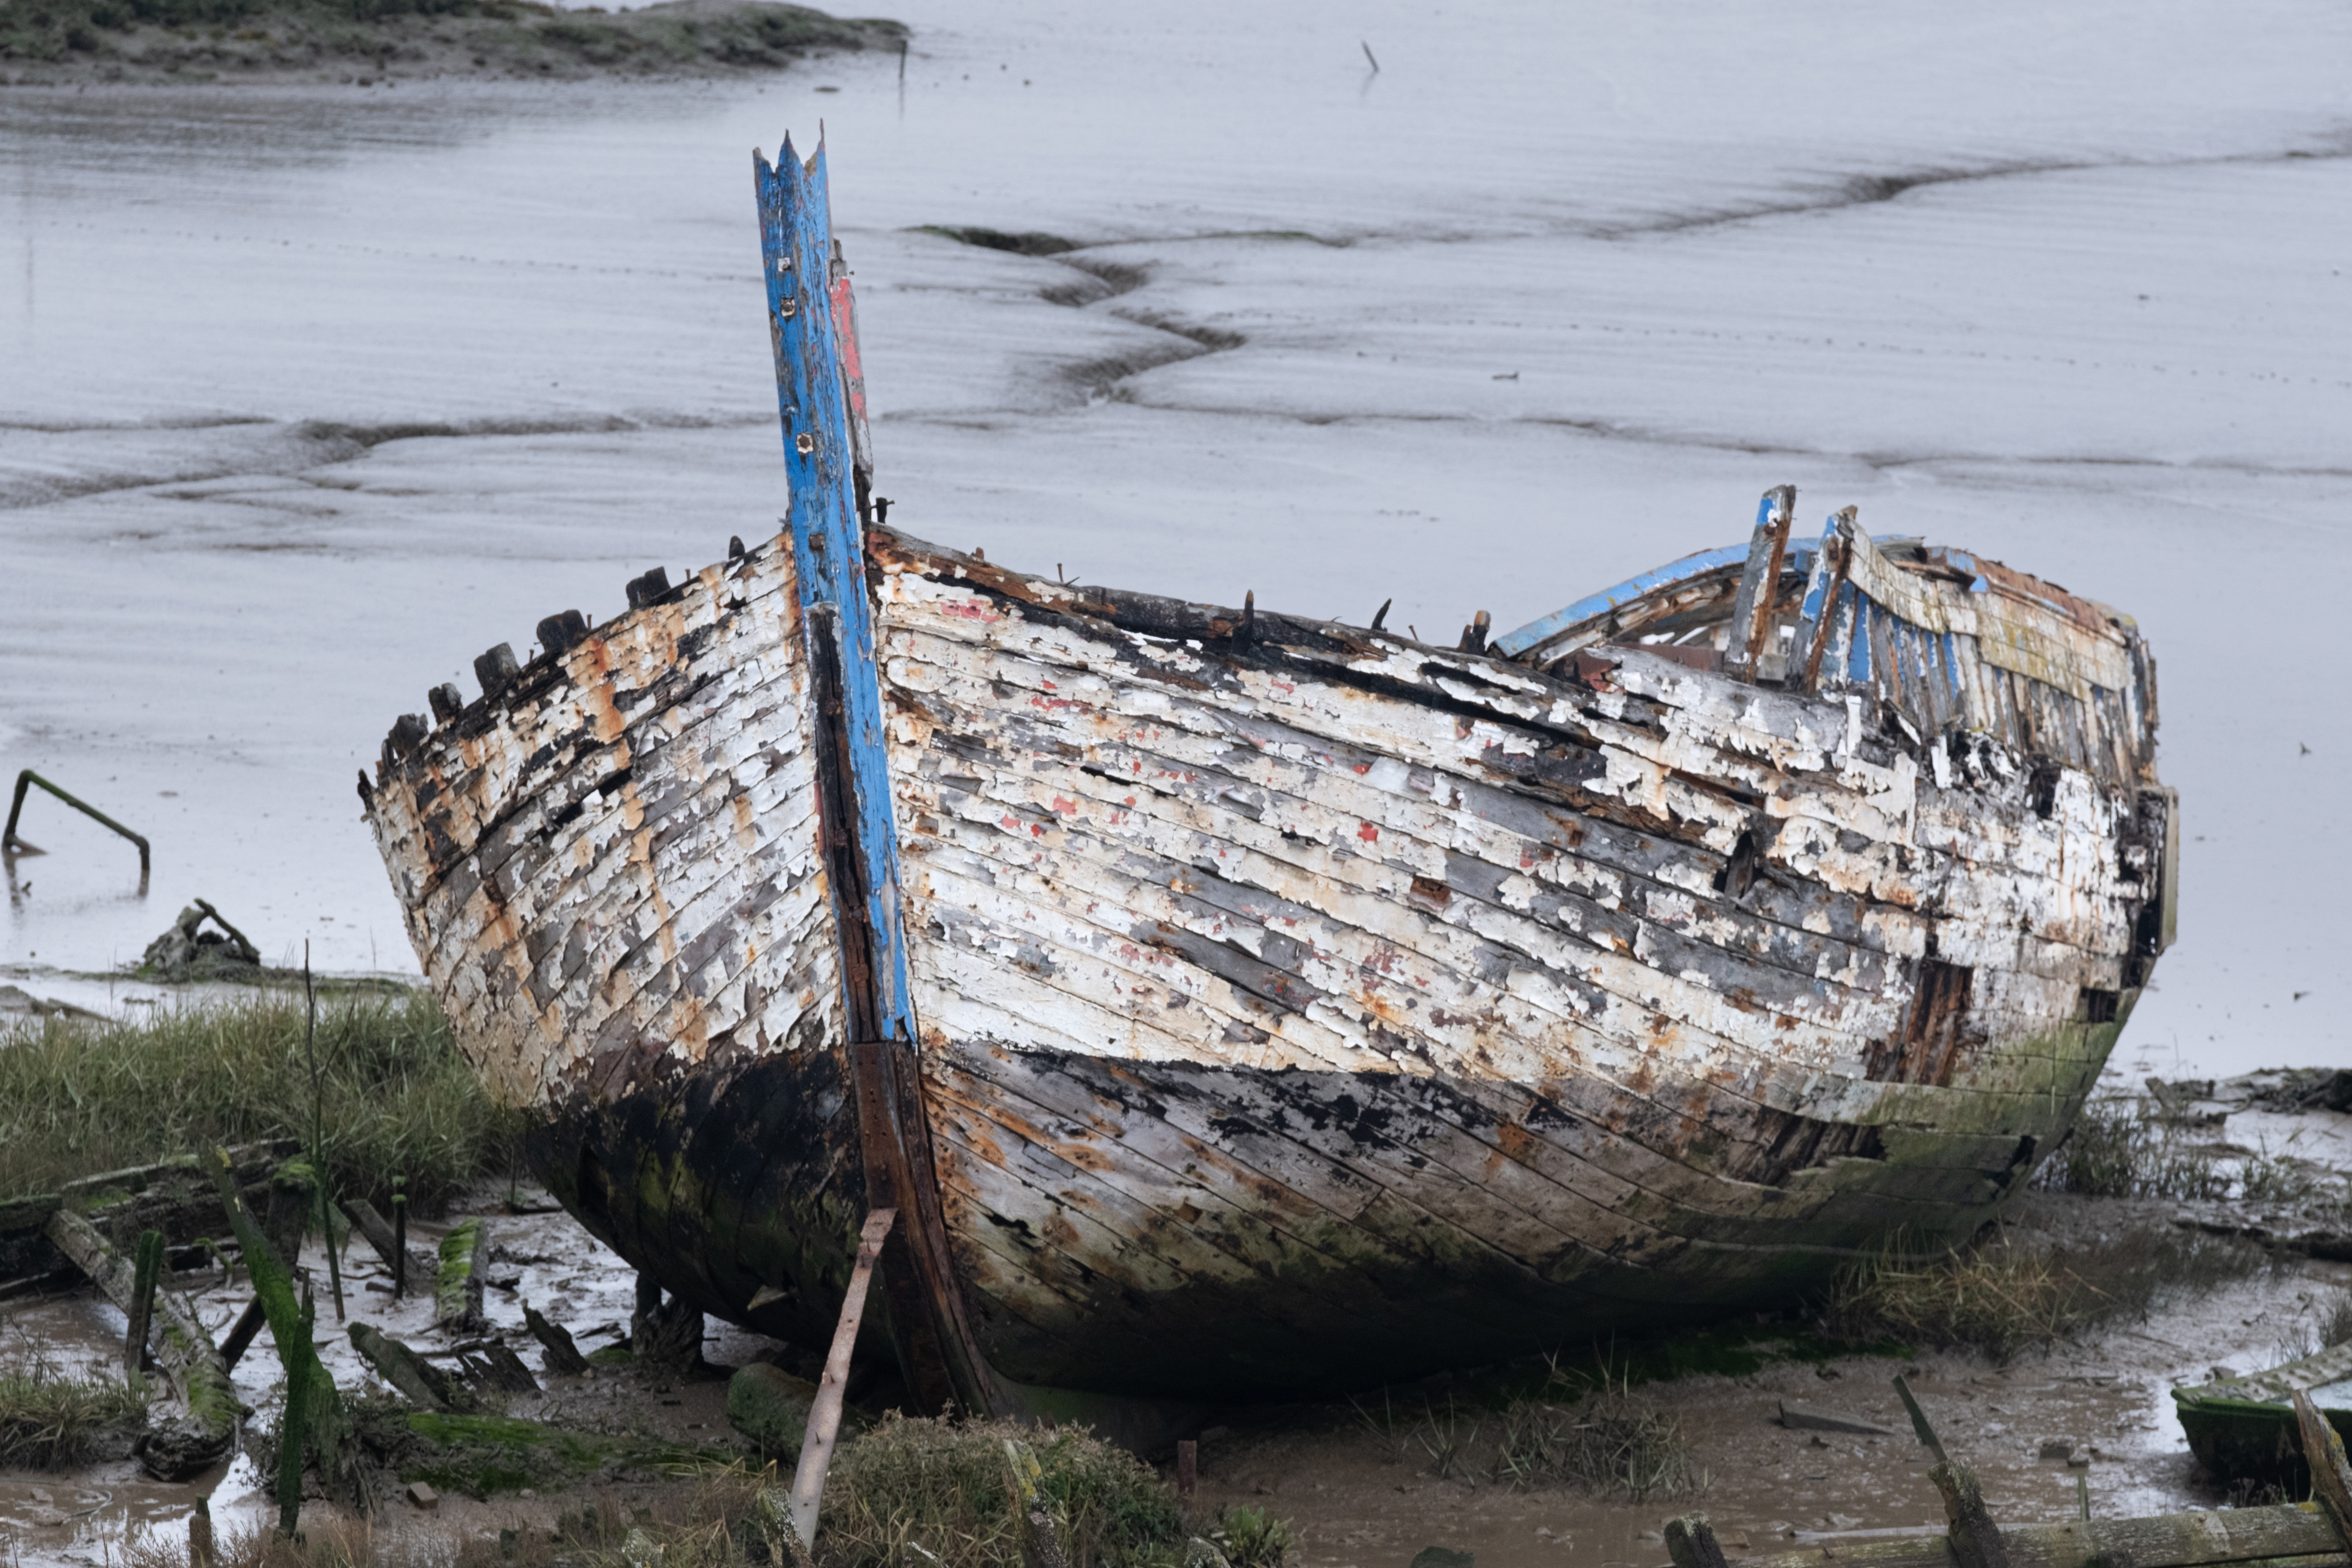 A shipwreck resting on the grass in front of mud flats